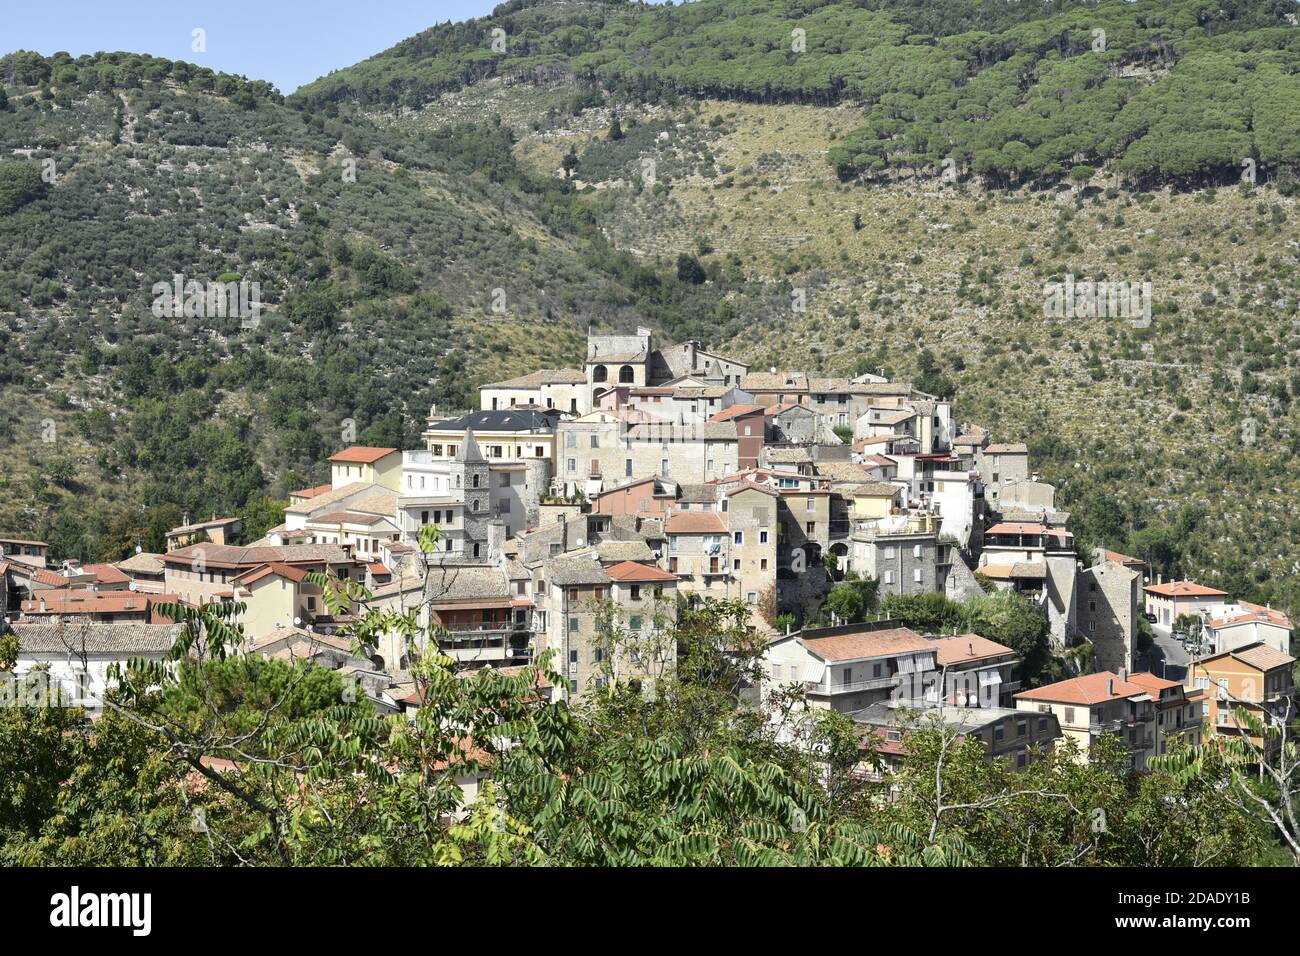 Panoramic view of Lenola, a medieval village in the mountains of the Lazio region, Italy. Stock Photo